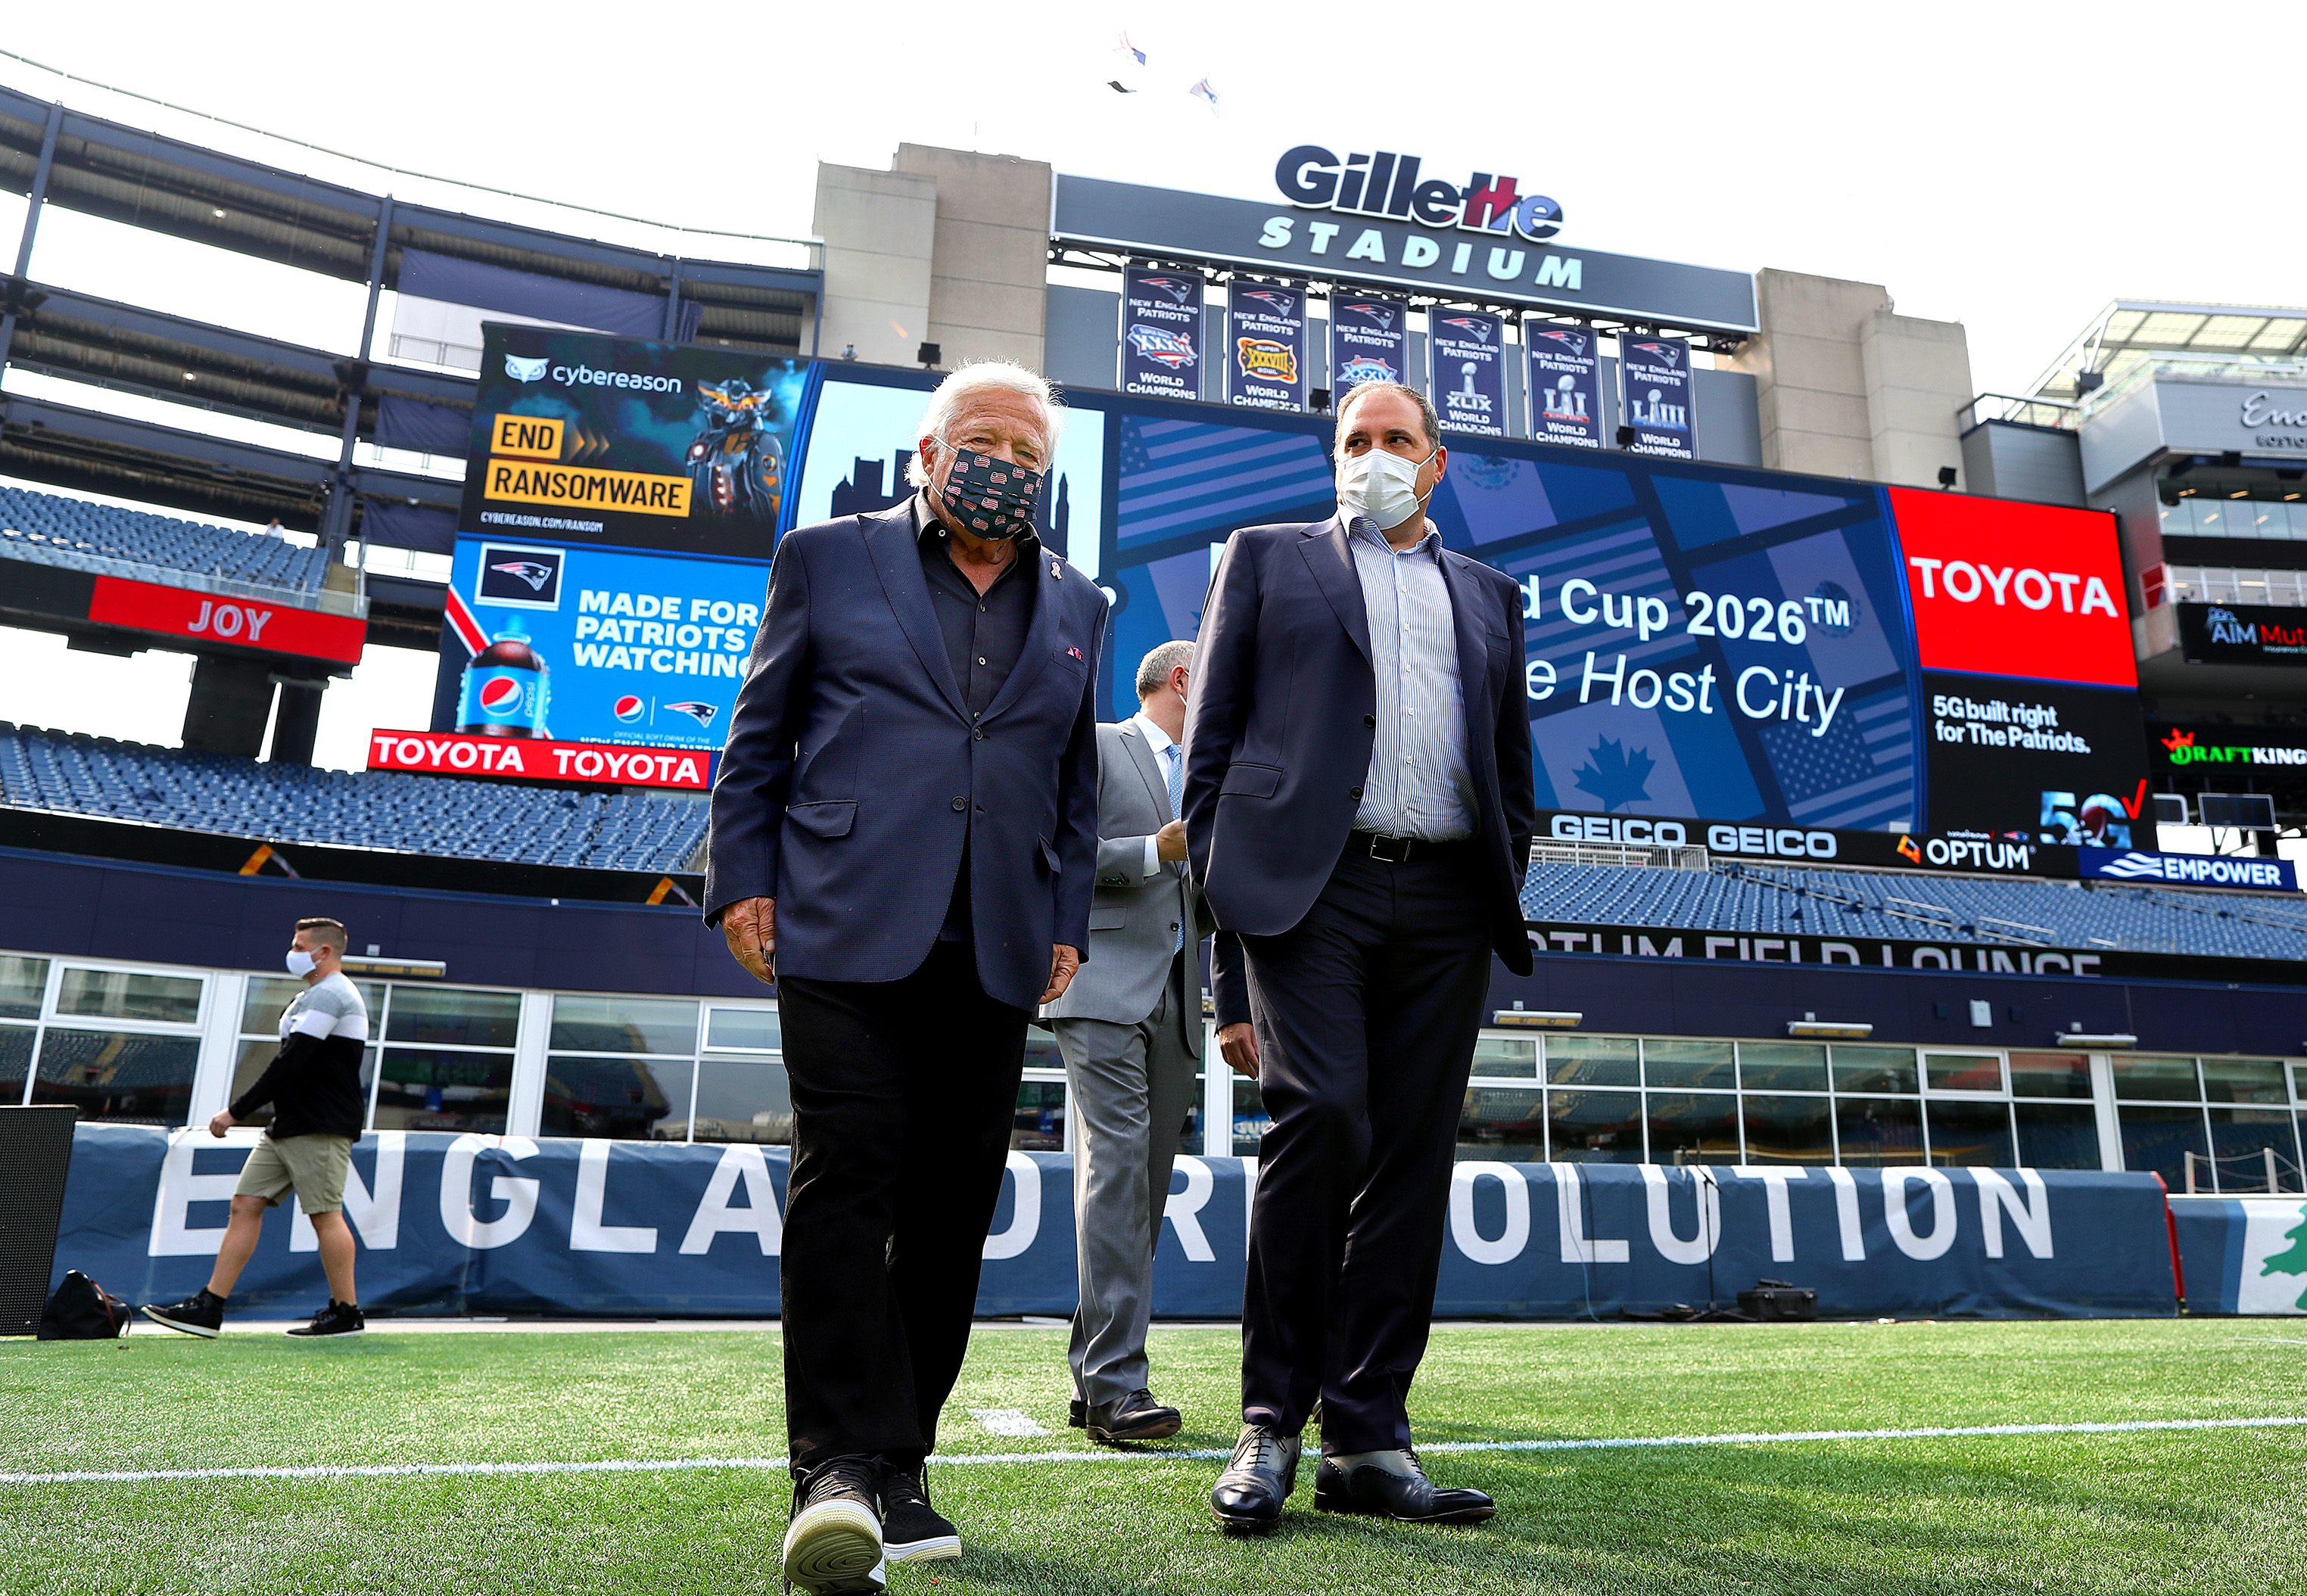 Gillette Stadium Considered As World Cup Location